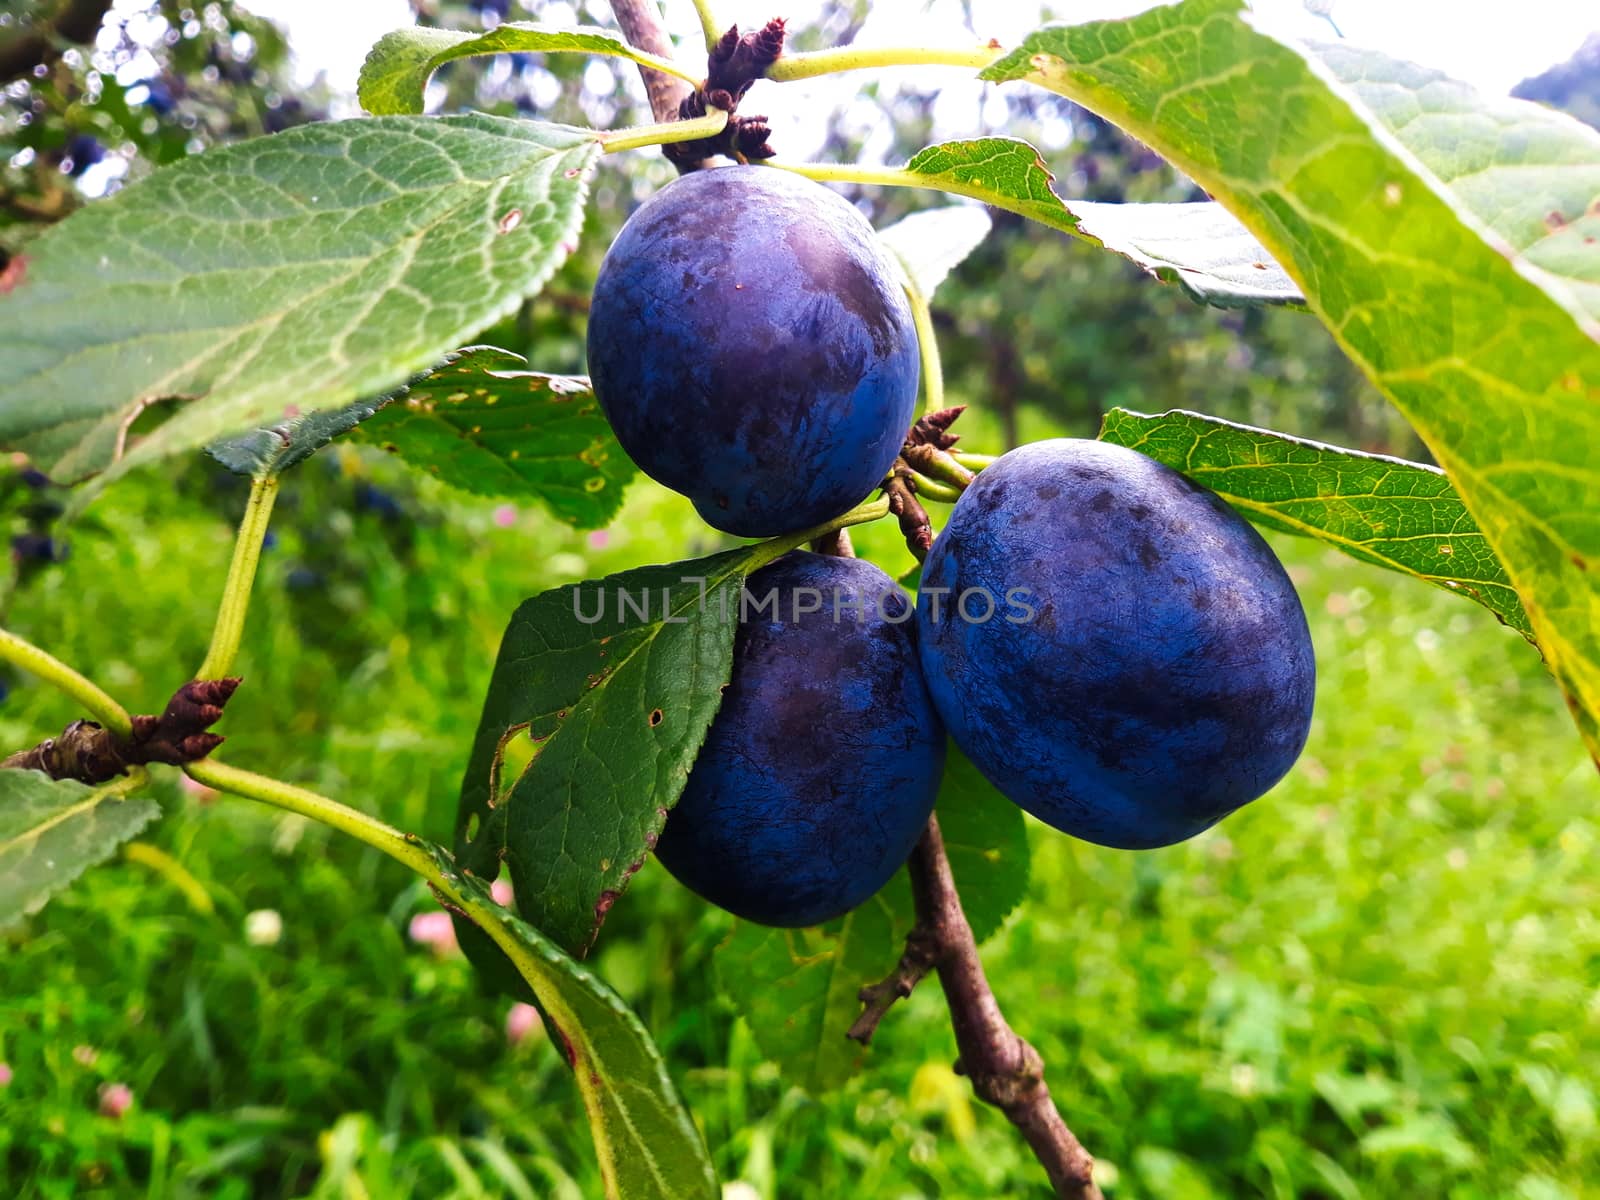 Three ripe plums on a branch. Beautiful blue plums in a group on a branch. Zavidovici, Bosnia and Herzegovina.